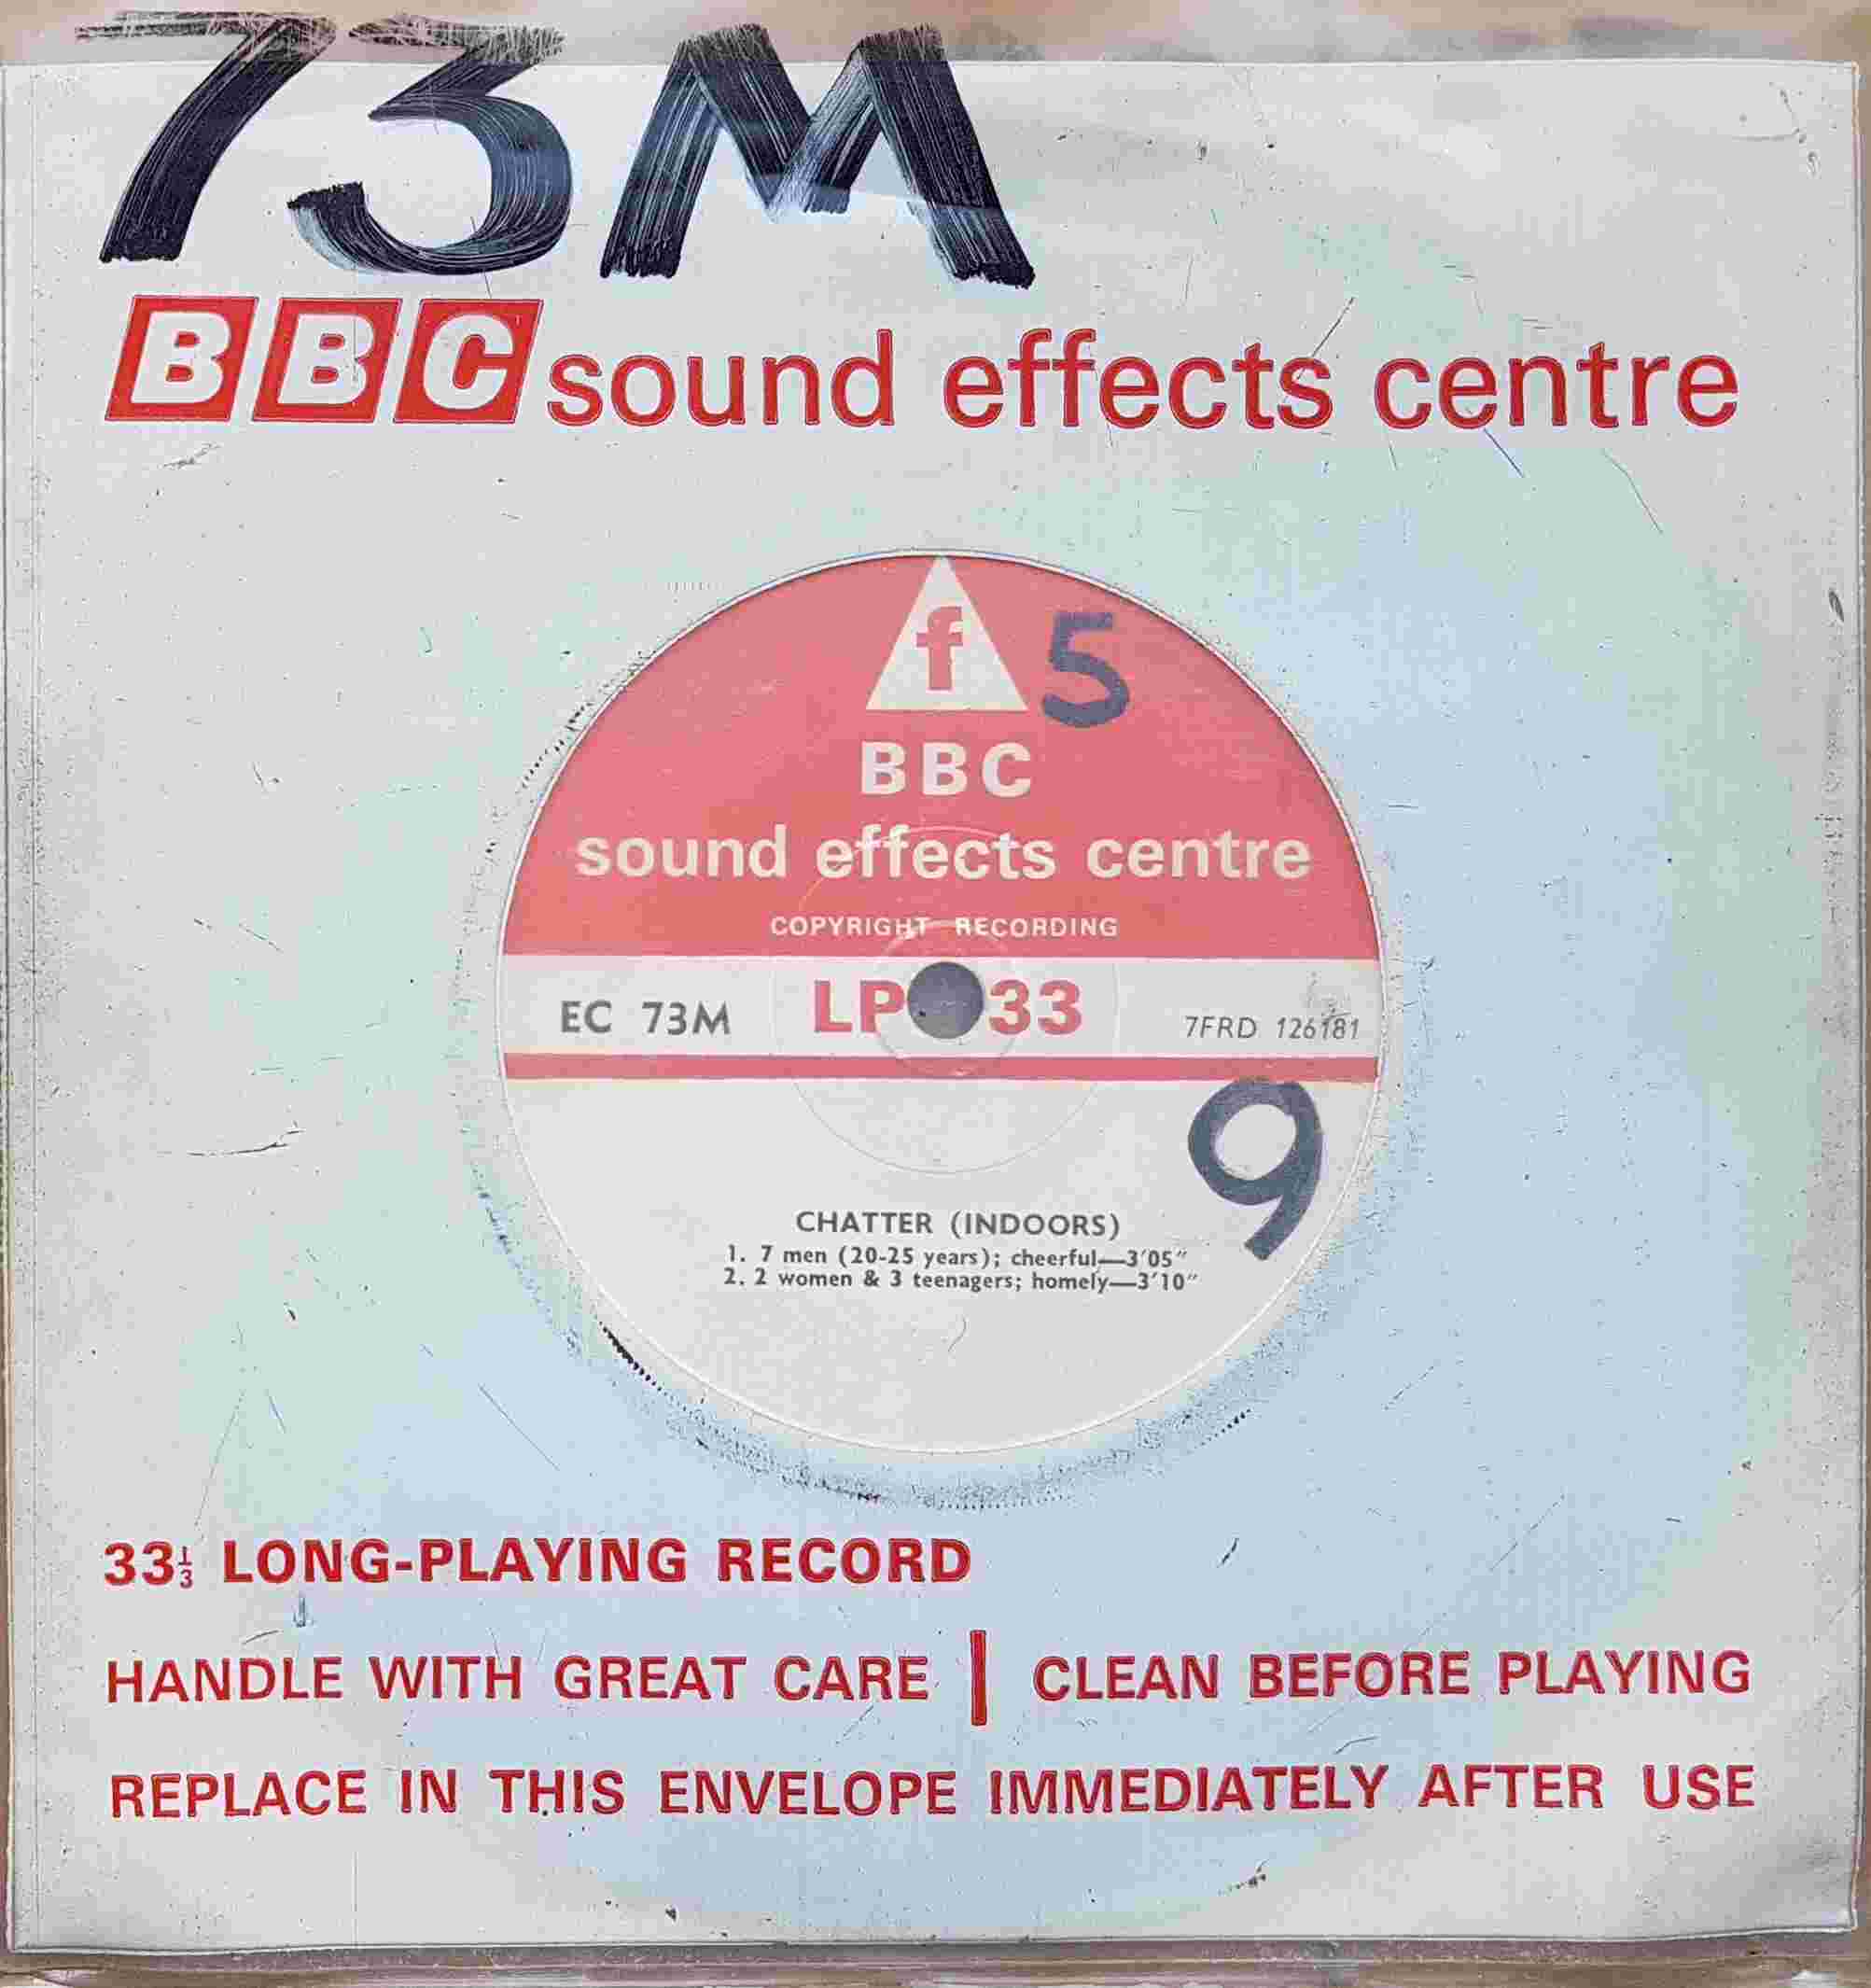 Picture of EC 73M Chatter - Indoors by artist Not registered from the BBC records and Tapes library